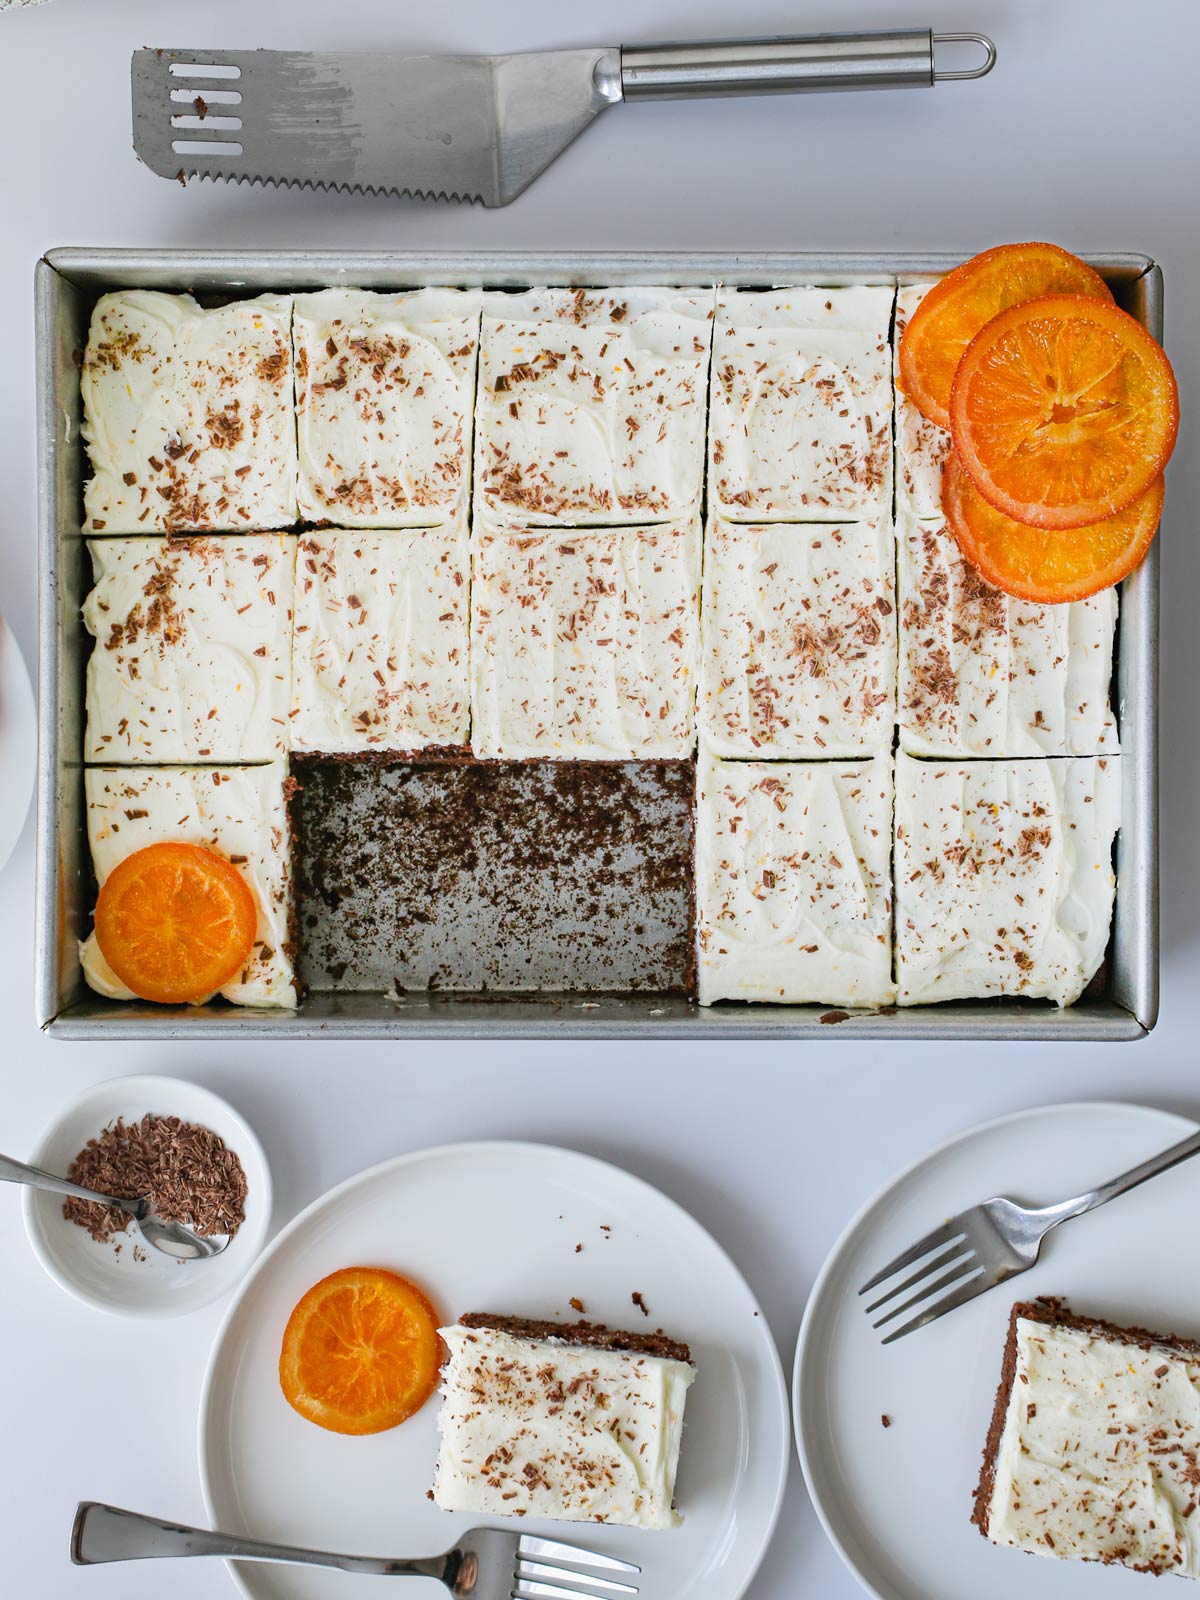 a frosted sheet cake topped with orange buttercream frosting and candied oranges.